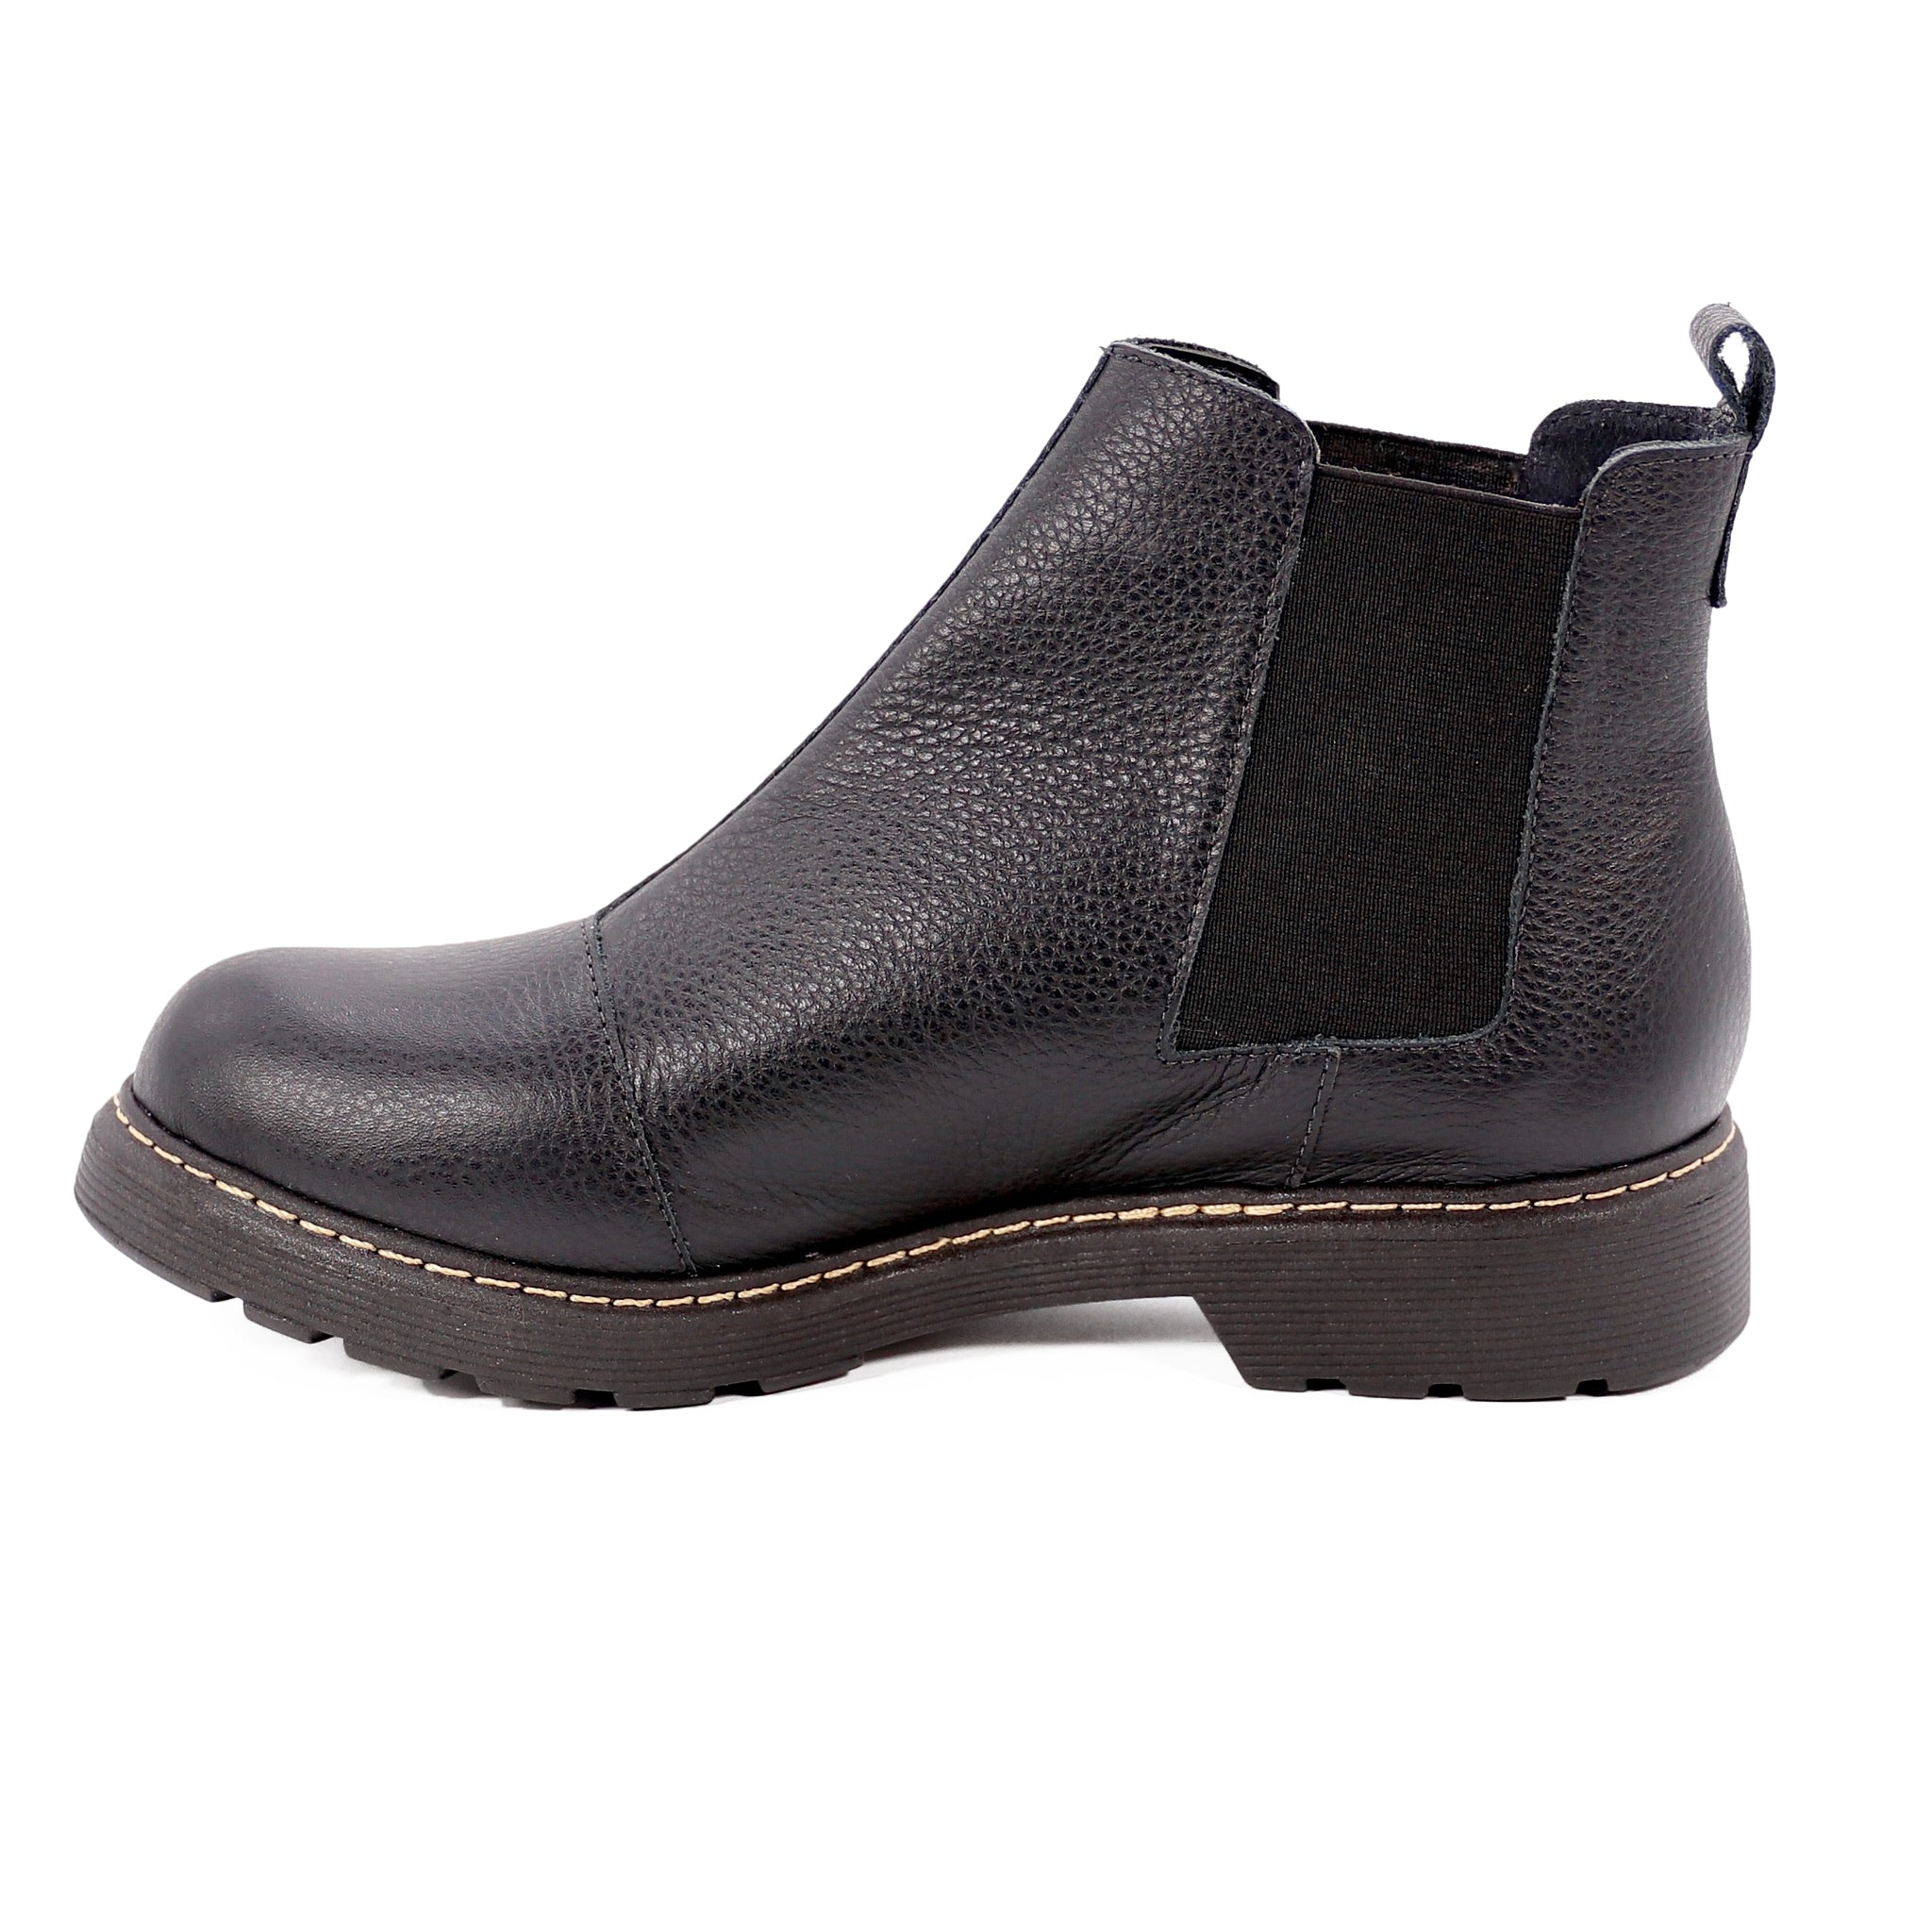 Women's Black Ankle Boots by Designer 